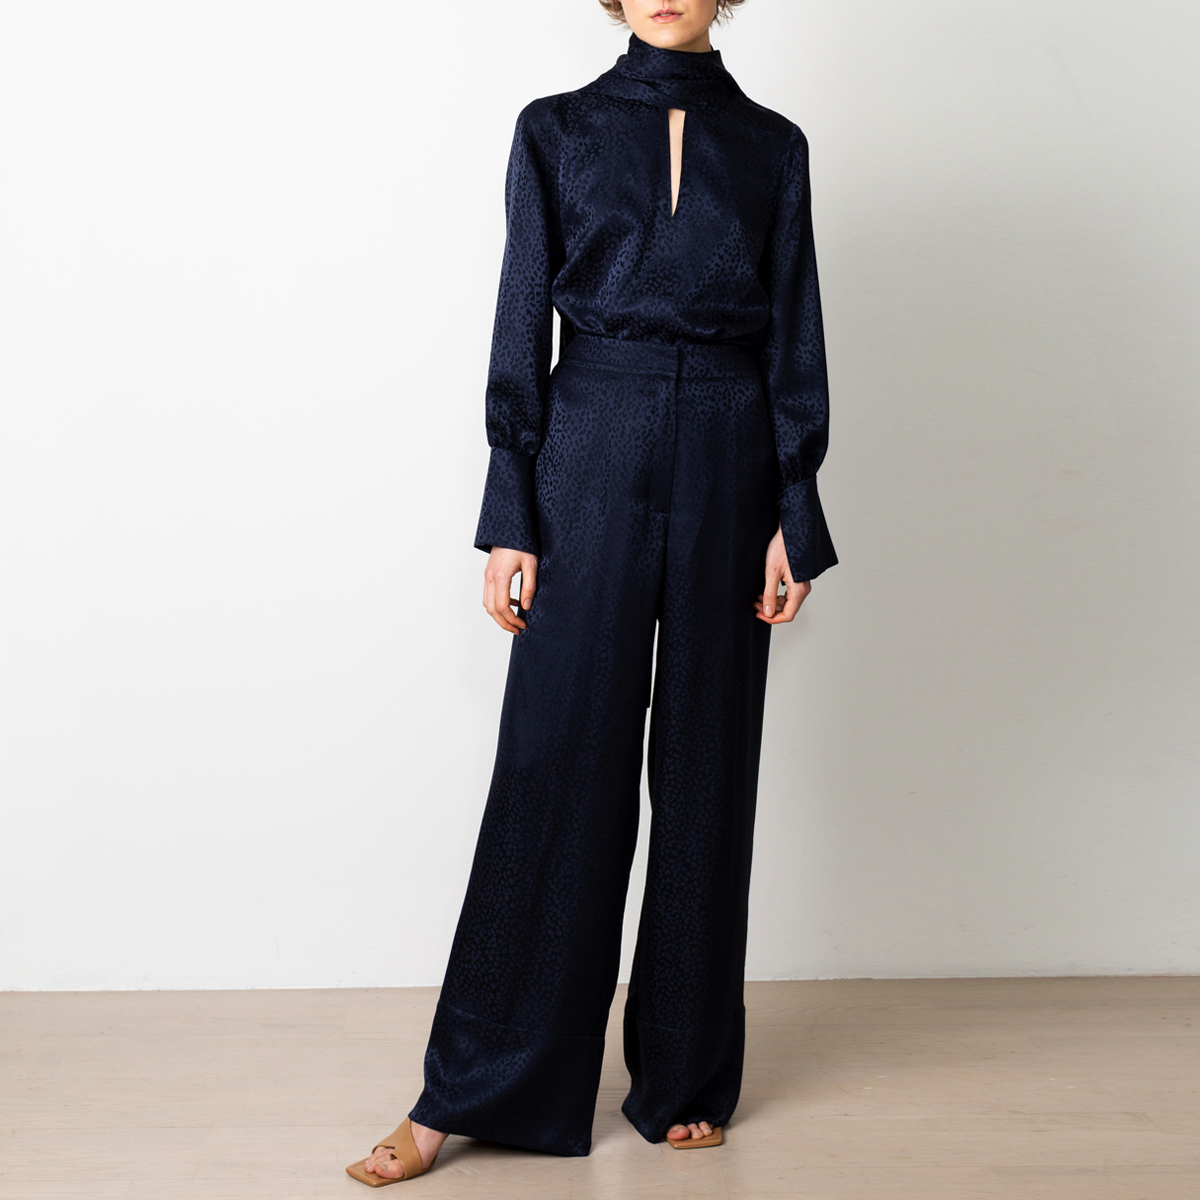 Limited edition long wide leg trousers in navy silk jacquard- Studio Heijne